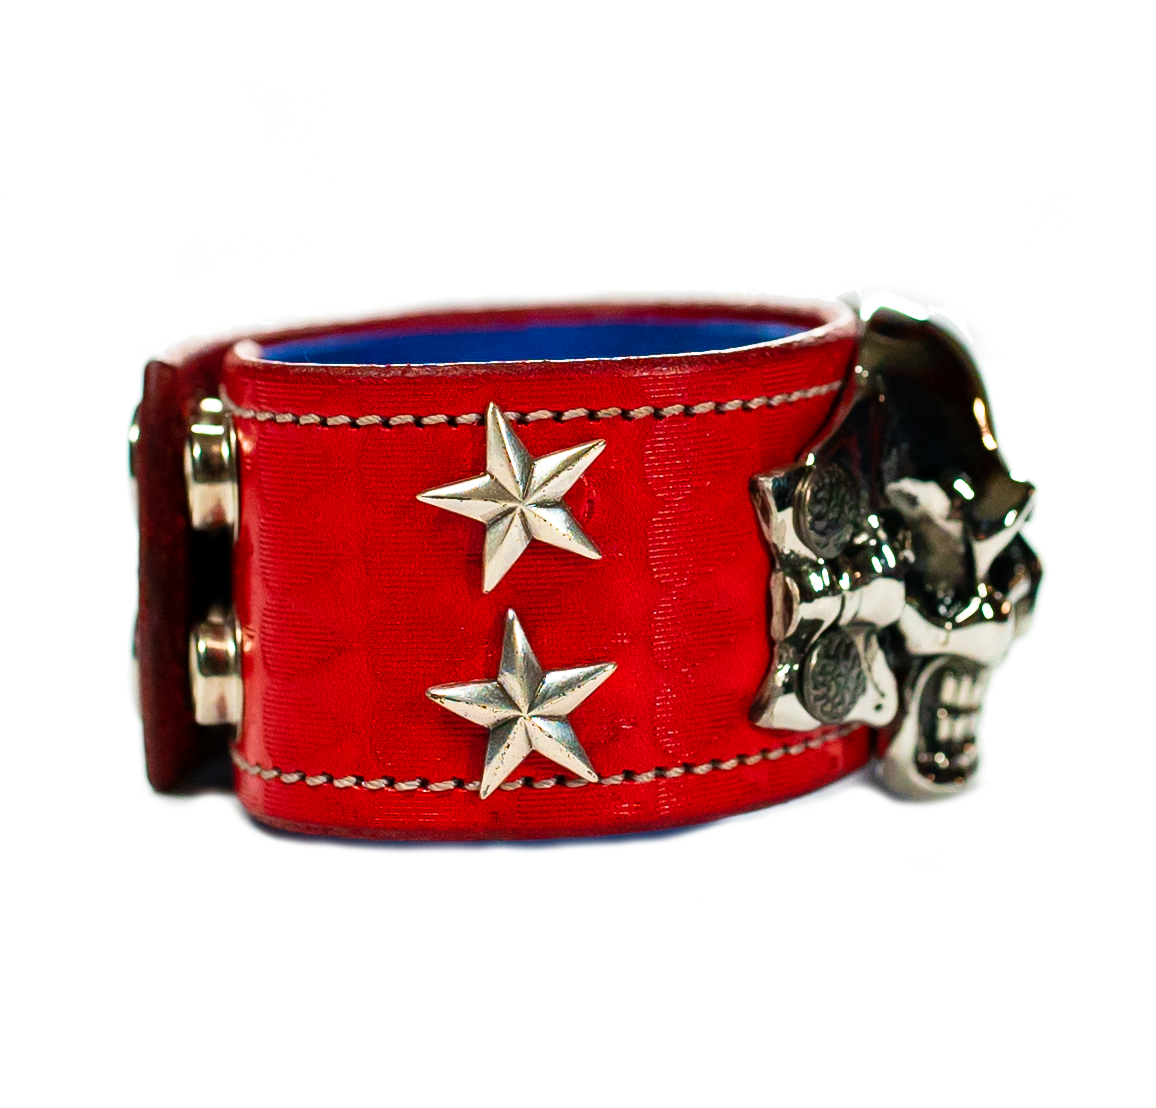 The Big Skull Red Leather Cuff right side